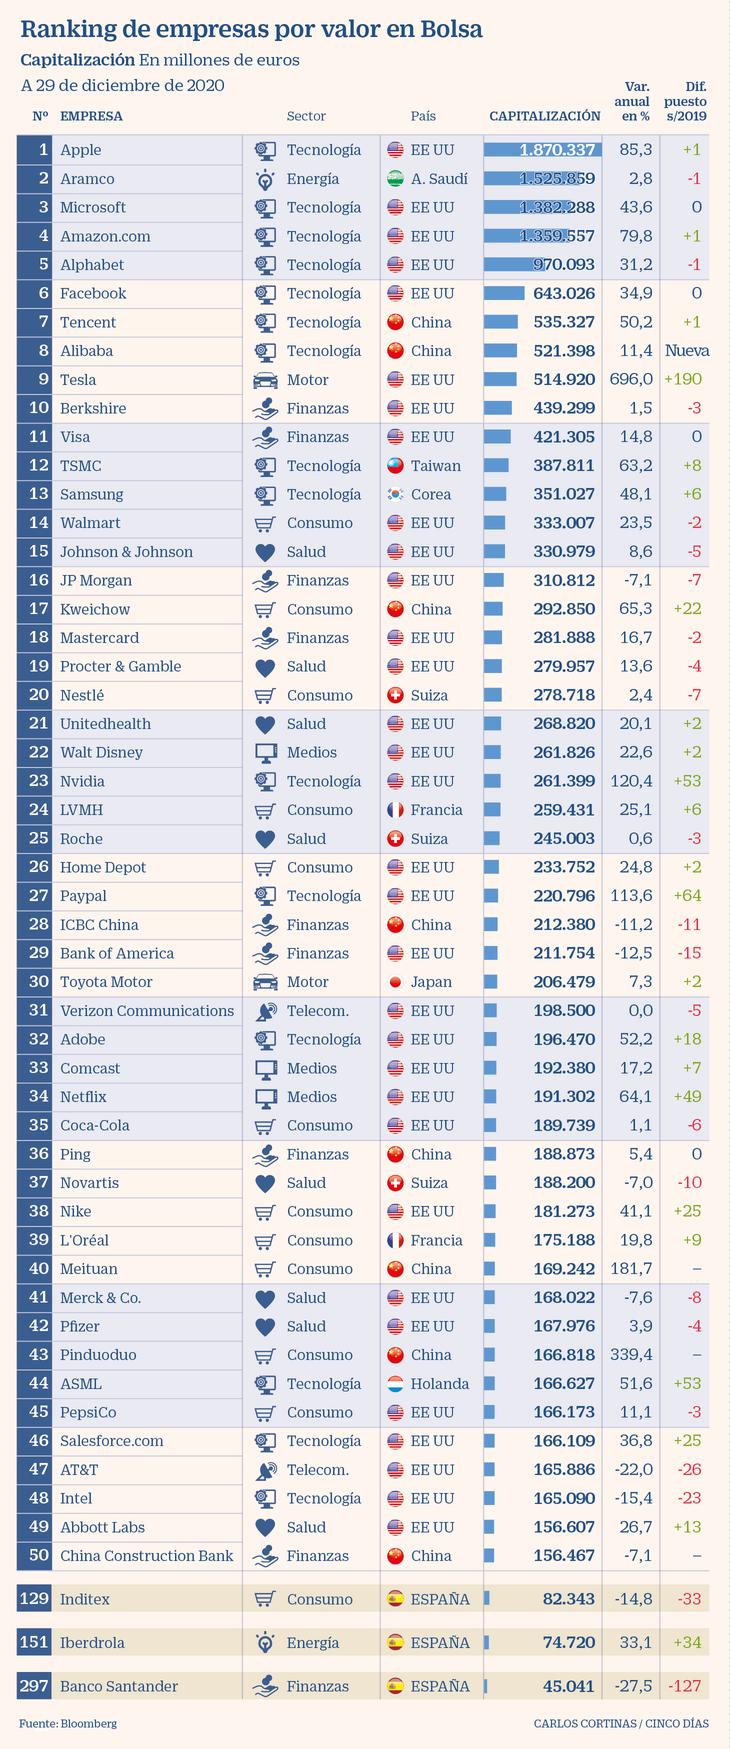 The 50 largest companies in the world by market value